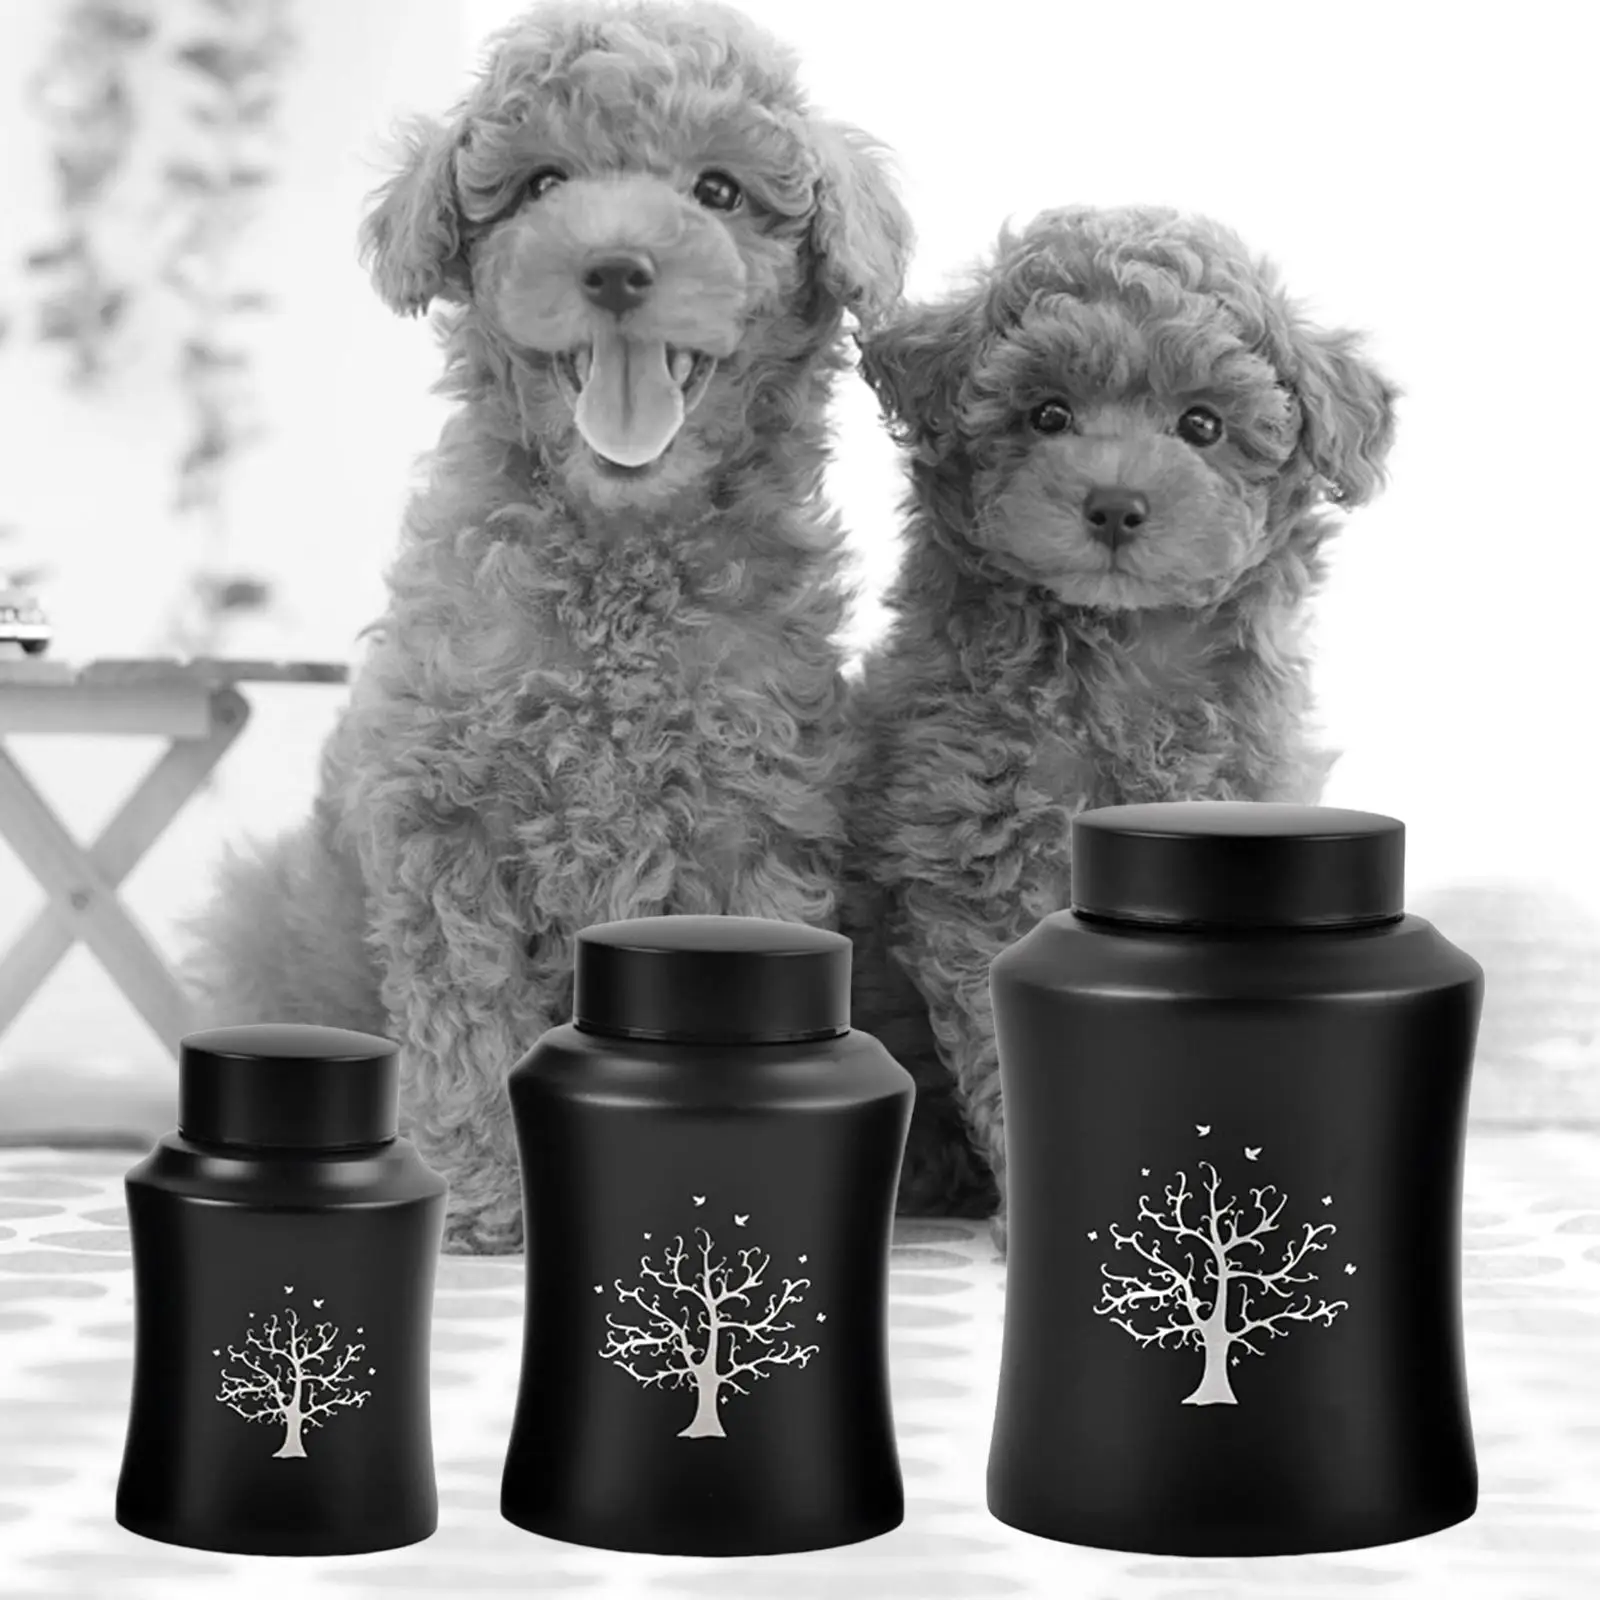 Pet Ash Urn Memories Peace and Comfort A Loving Resting Place Keepsake Souvenir Stainless Steel Urn Box for Dogs and Cats Ashes